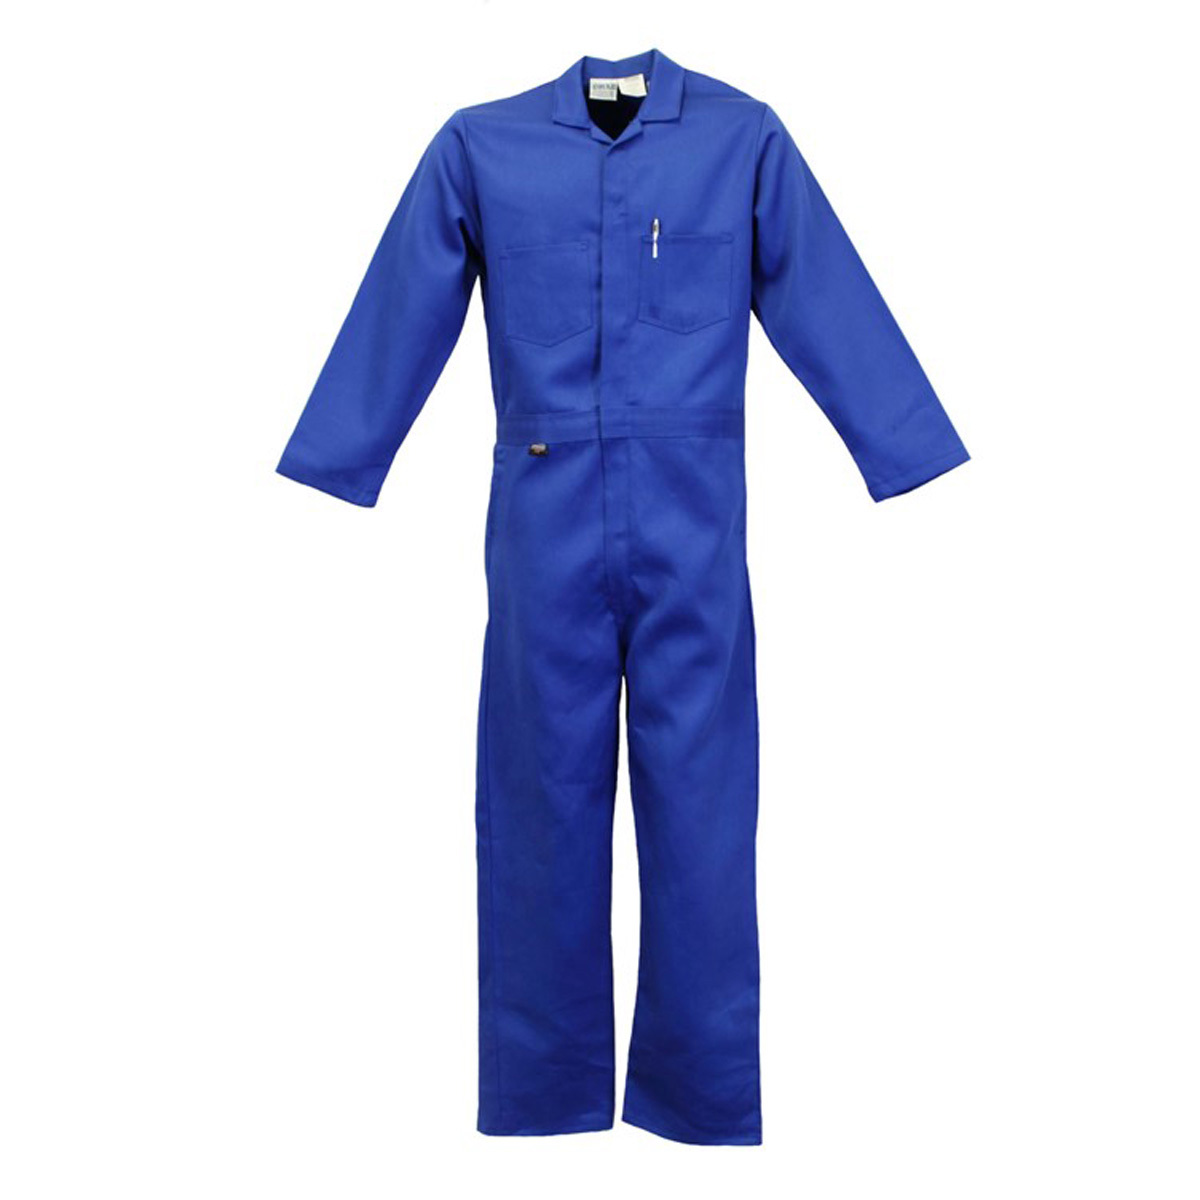 Stanco Safety Products™ Size 2X Royal Blue Indura® Arc Rated Flame Resistant Coveralls With Front Zipper Closure